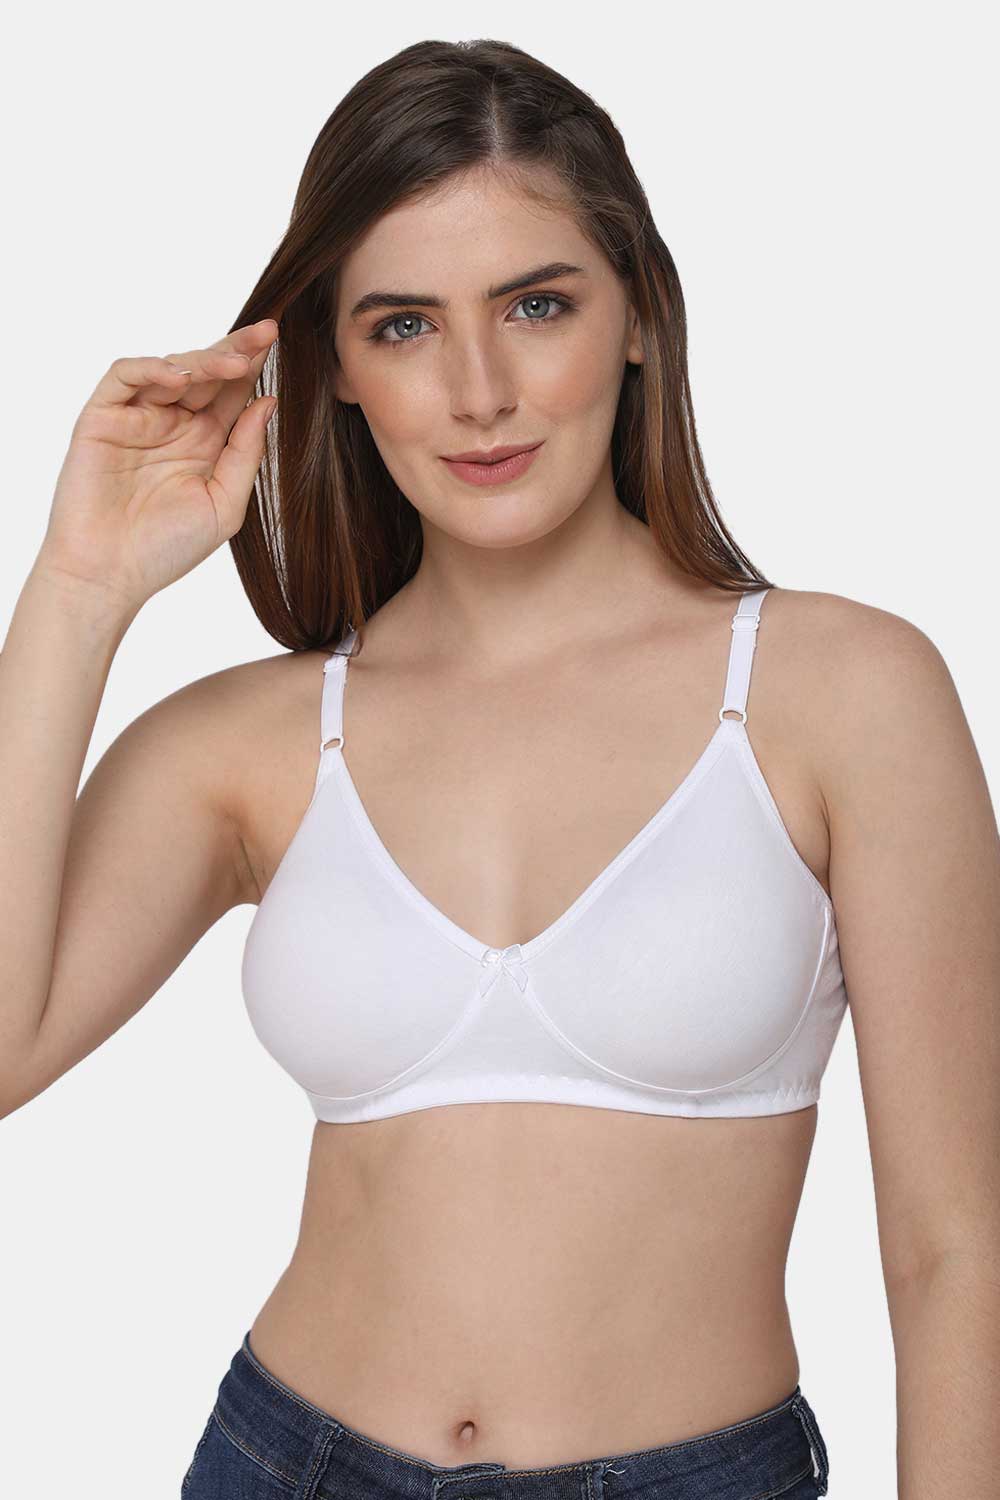 Buy INNER TOUCH Women's Cotton Non-Padded Non-Wired Broad Strap